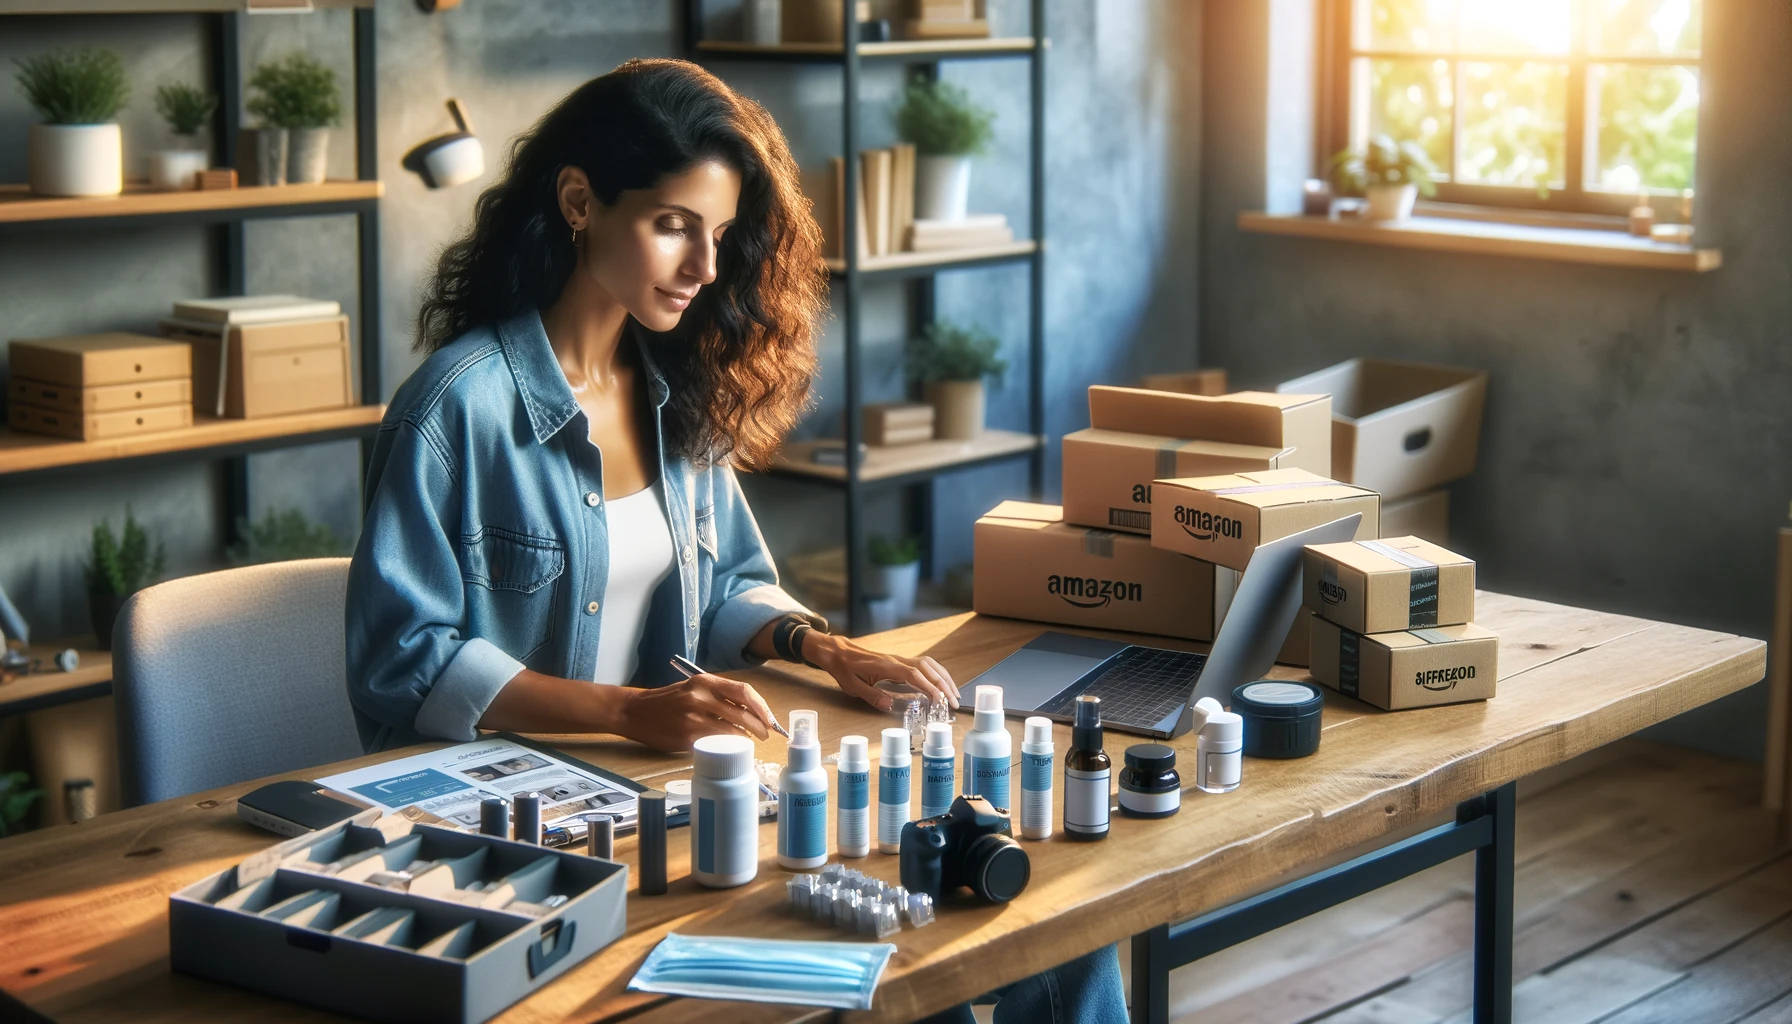 A female entrepreneur of mixed descent is in her home office, actively testing various products that she plans to sell on Amazon. She's engaged in examining and evaluating different items, showcasing a hands-on approach to her business. The office is modern and well-organized, with products laid out on the desk for assessment. The scene is lit by natural light, creating a realistic and inviting atmosphere. The photorealistic image should resemble a Canon EOS 5D Mark IV shot with a 50mm lens, with a slight overexposure for a bright and airy feel.